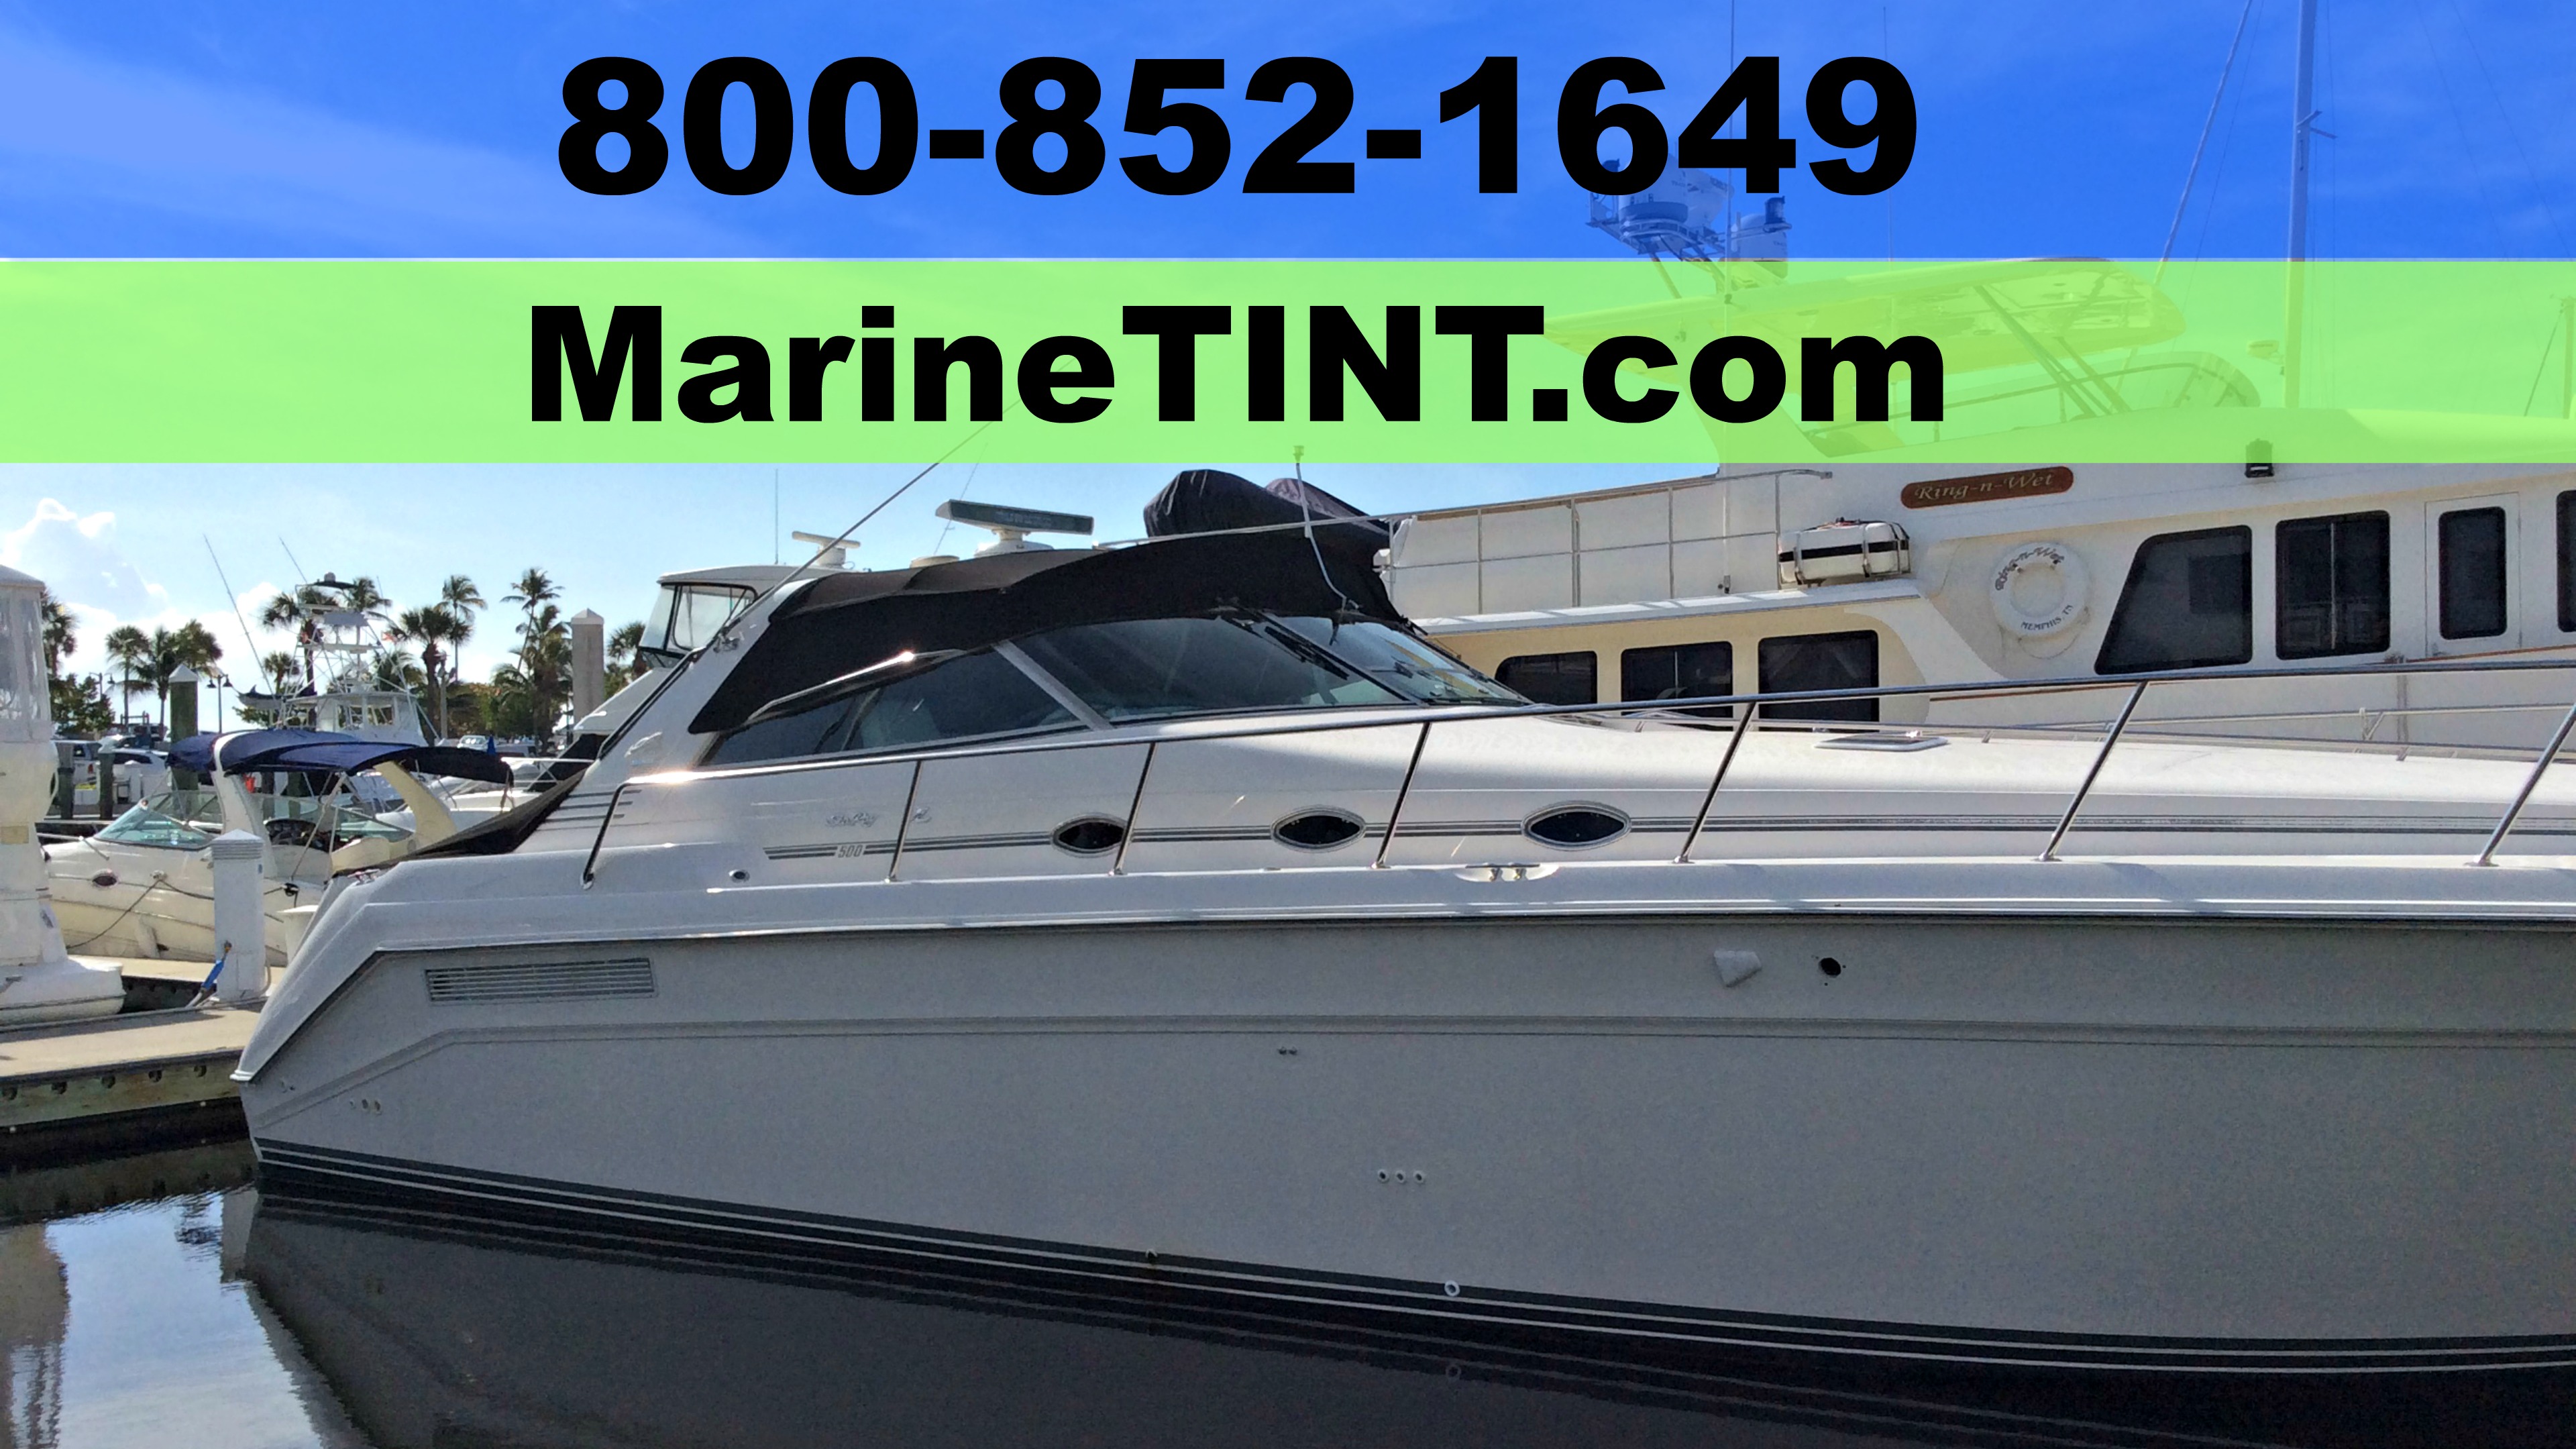 Boat Window Tinting Fort Lauderdale